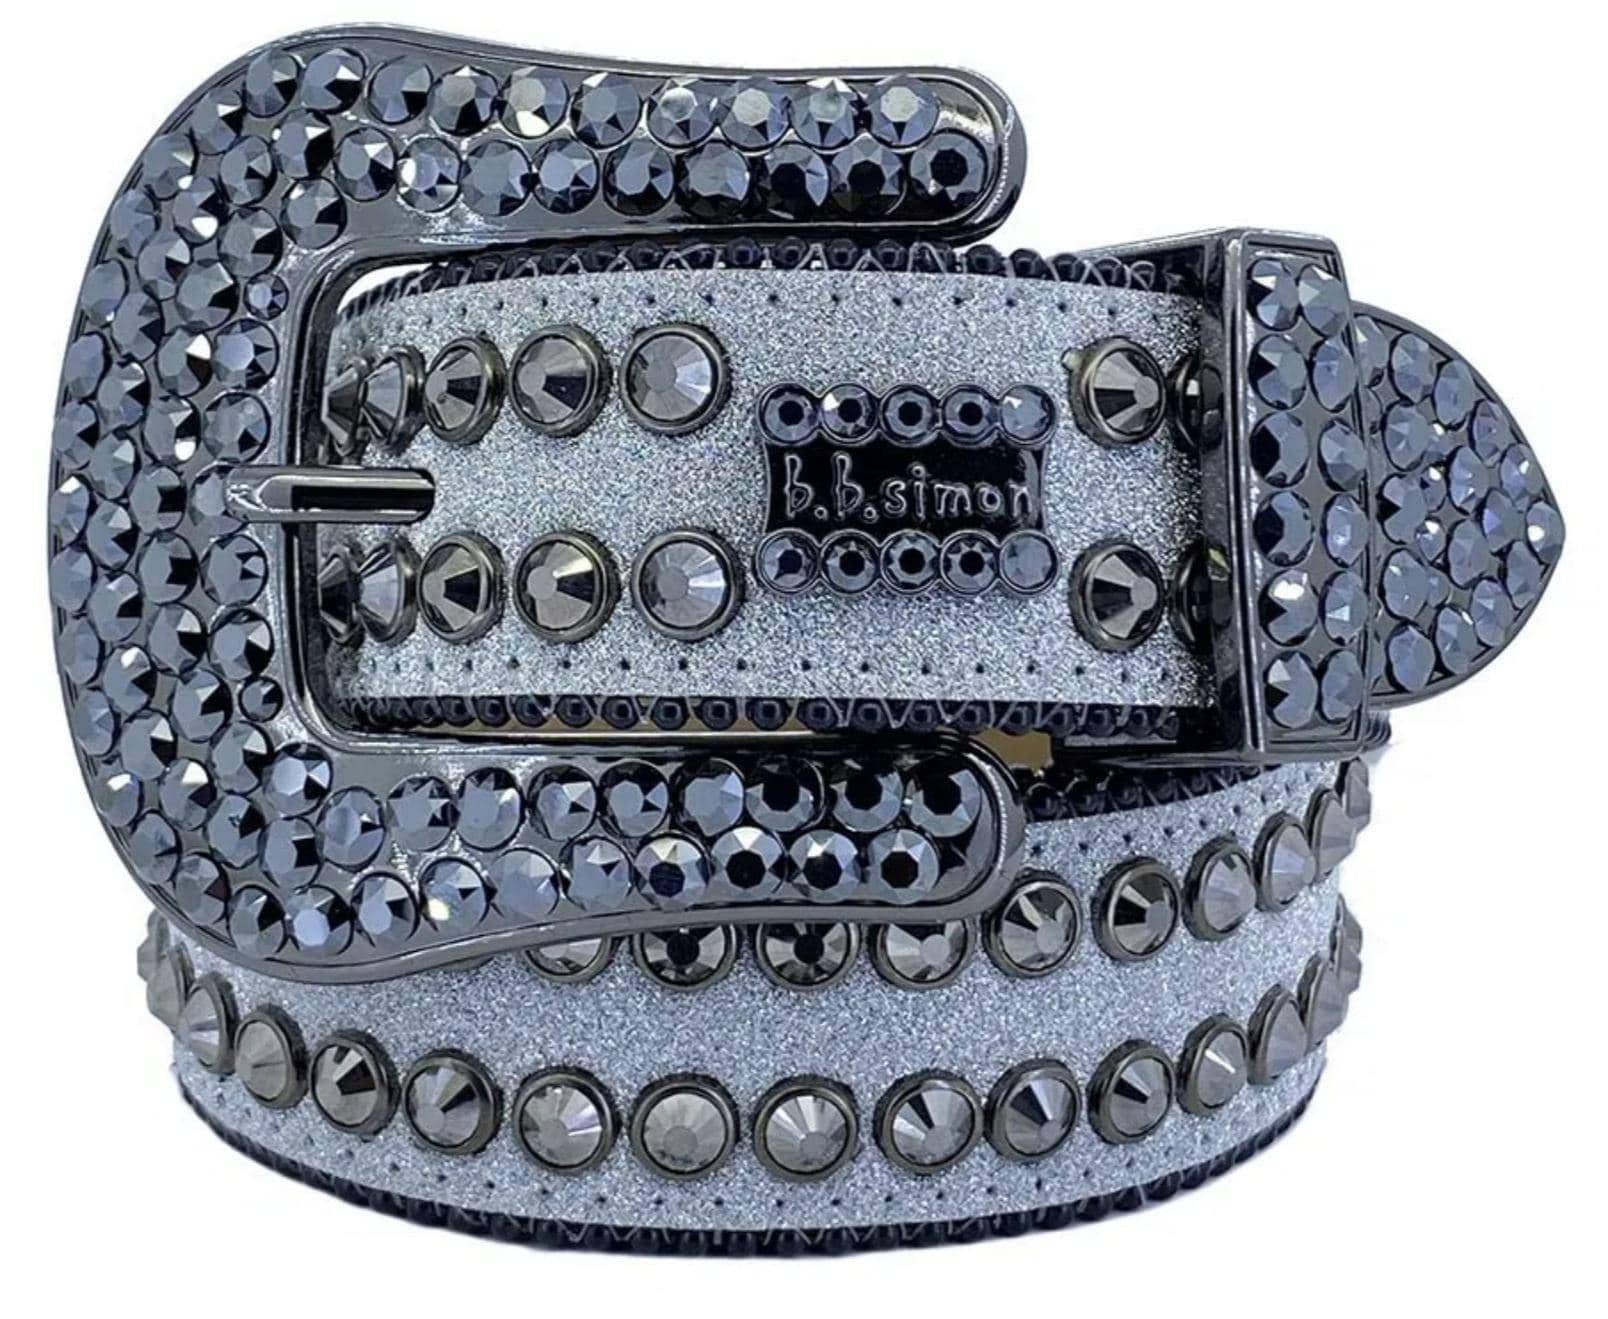 Bb Simon Darband 2 Silver Leather with Crystals Belt, XL